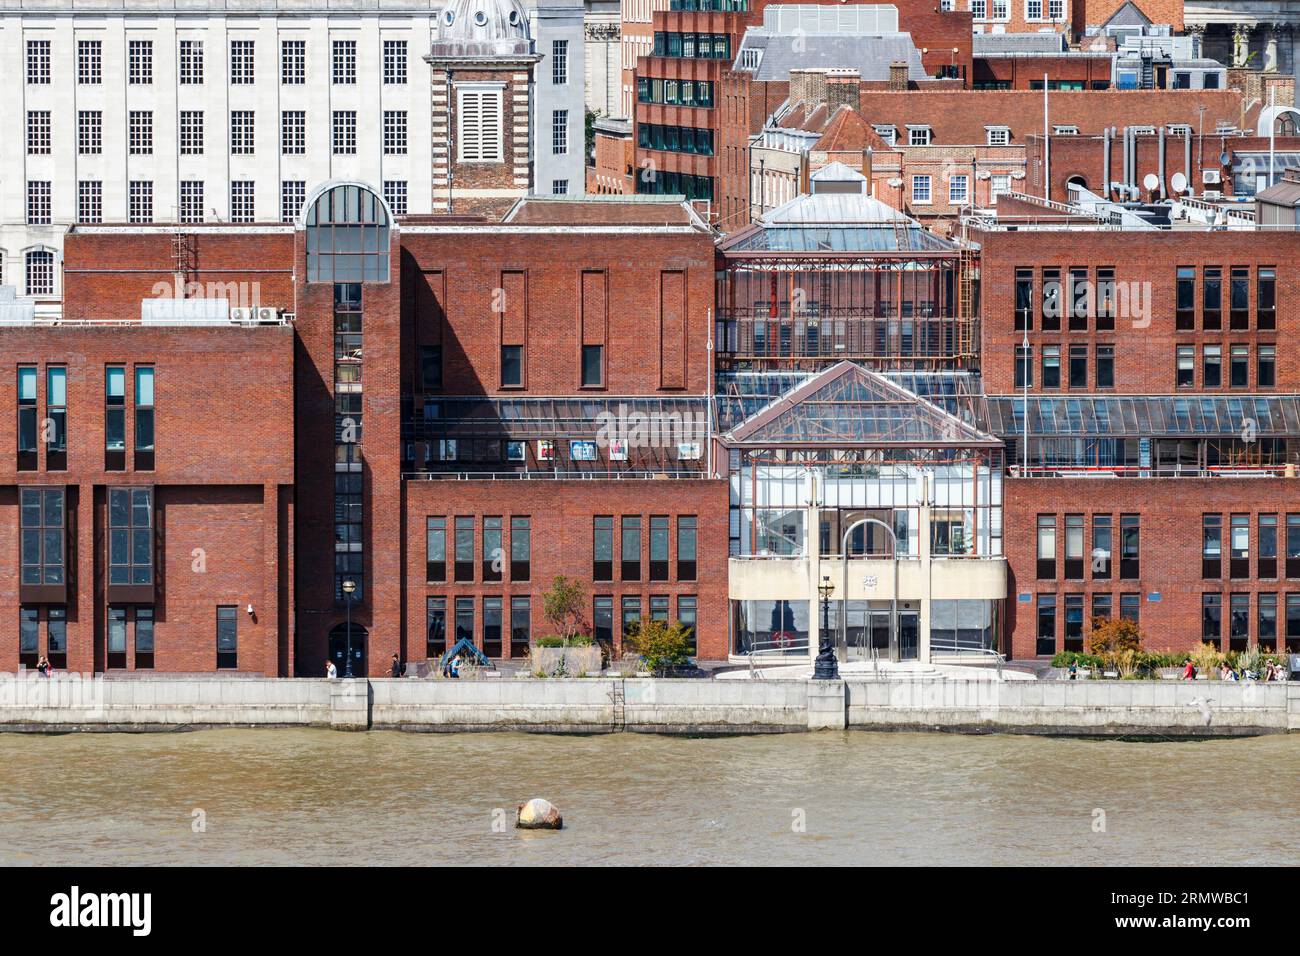 City of London School, a private independent day school, seen from across the River Thames, London, UK Stock Photo